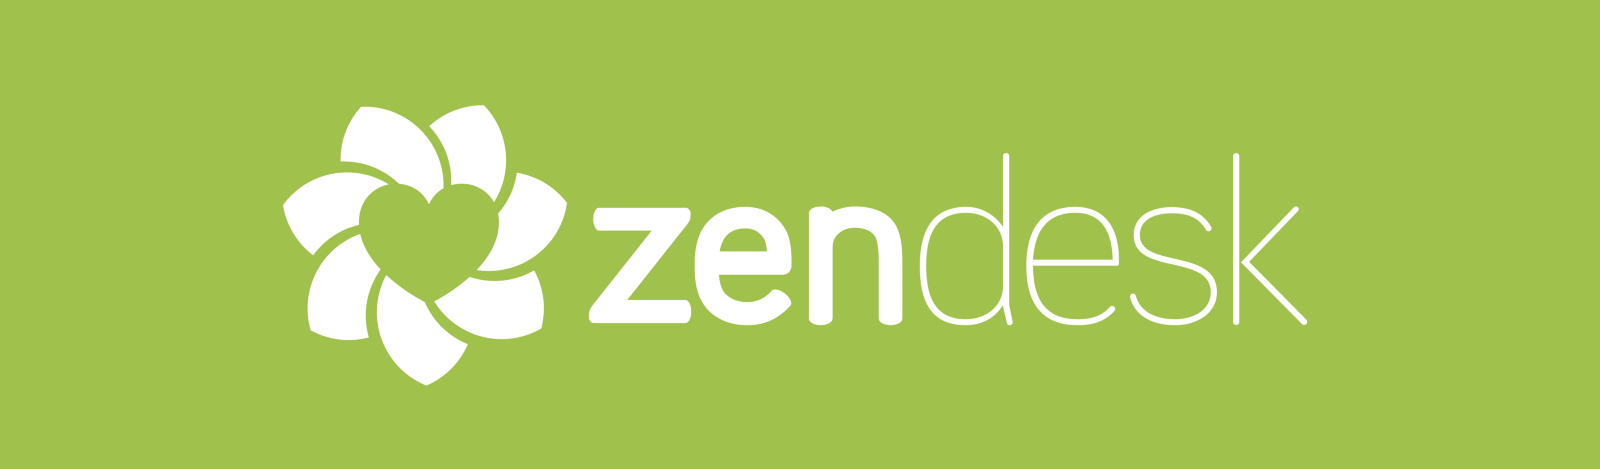 Zendesk Logo - Redesigns and New Beginnings